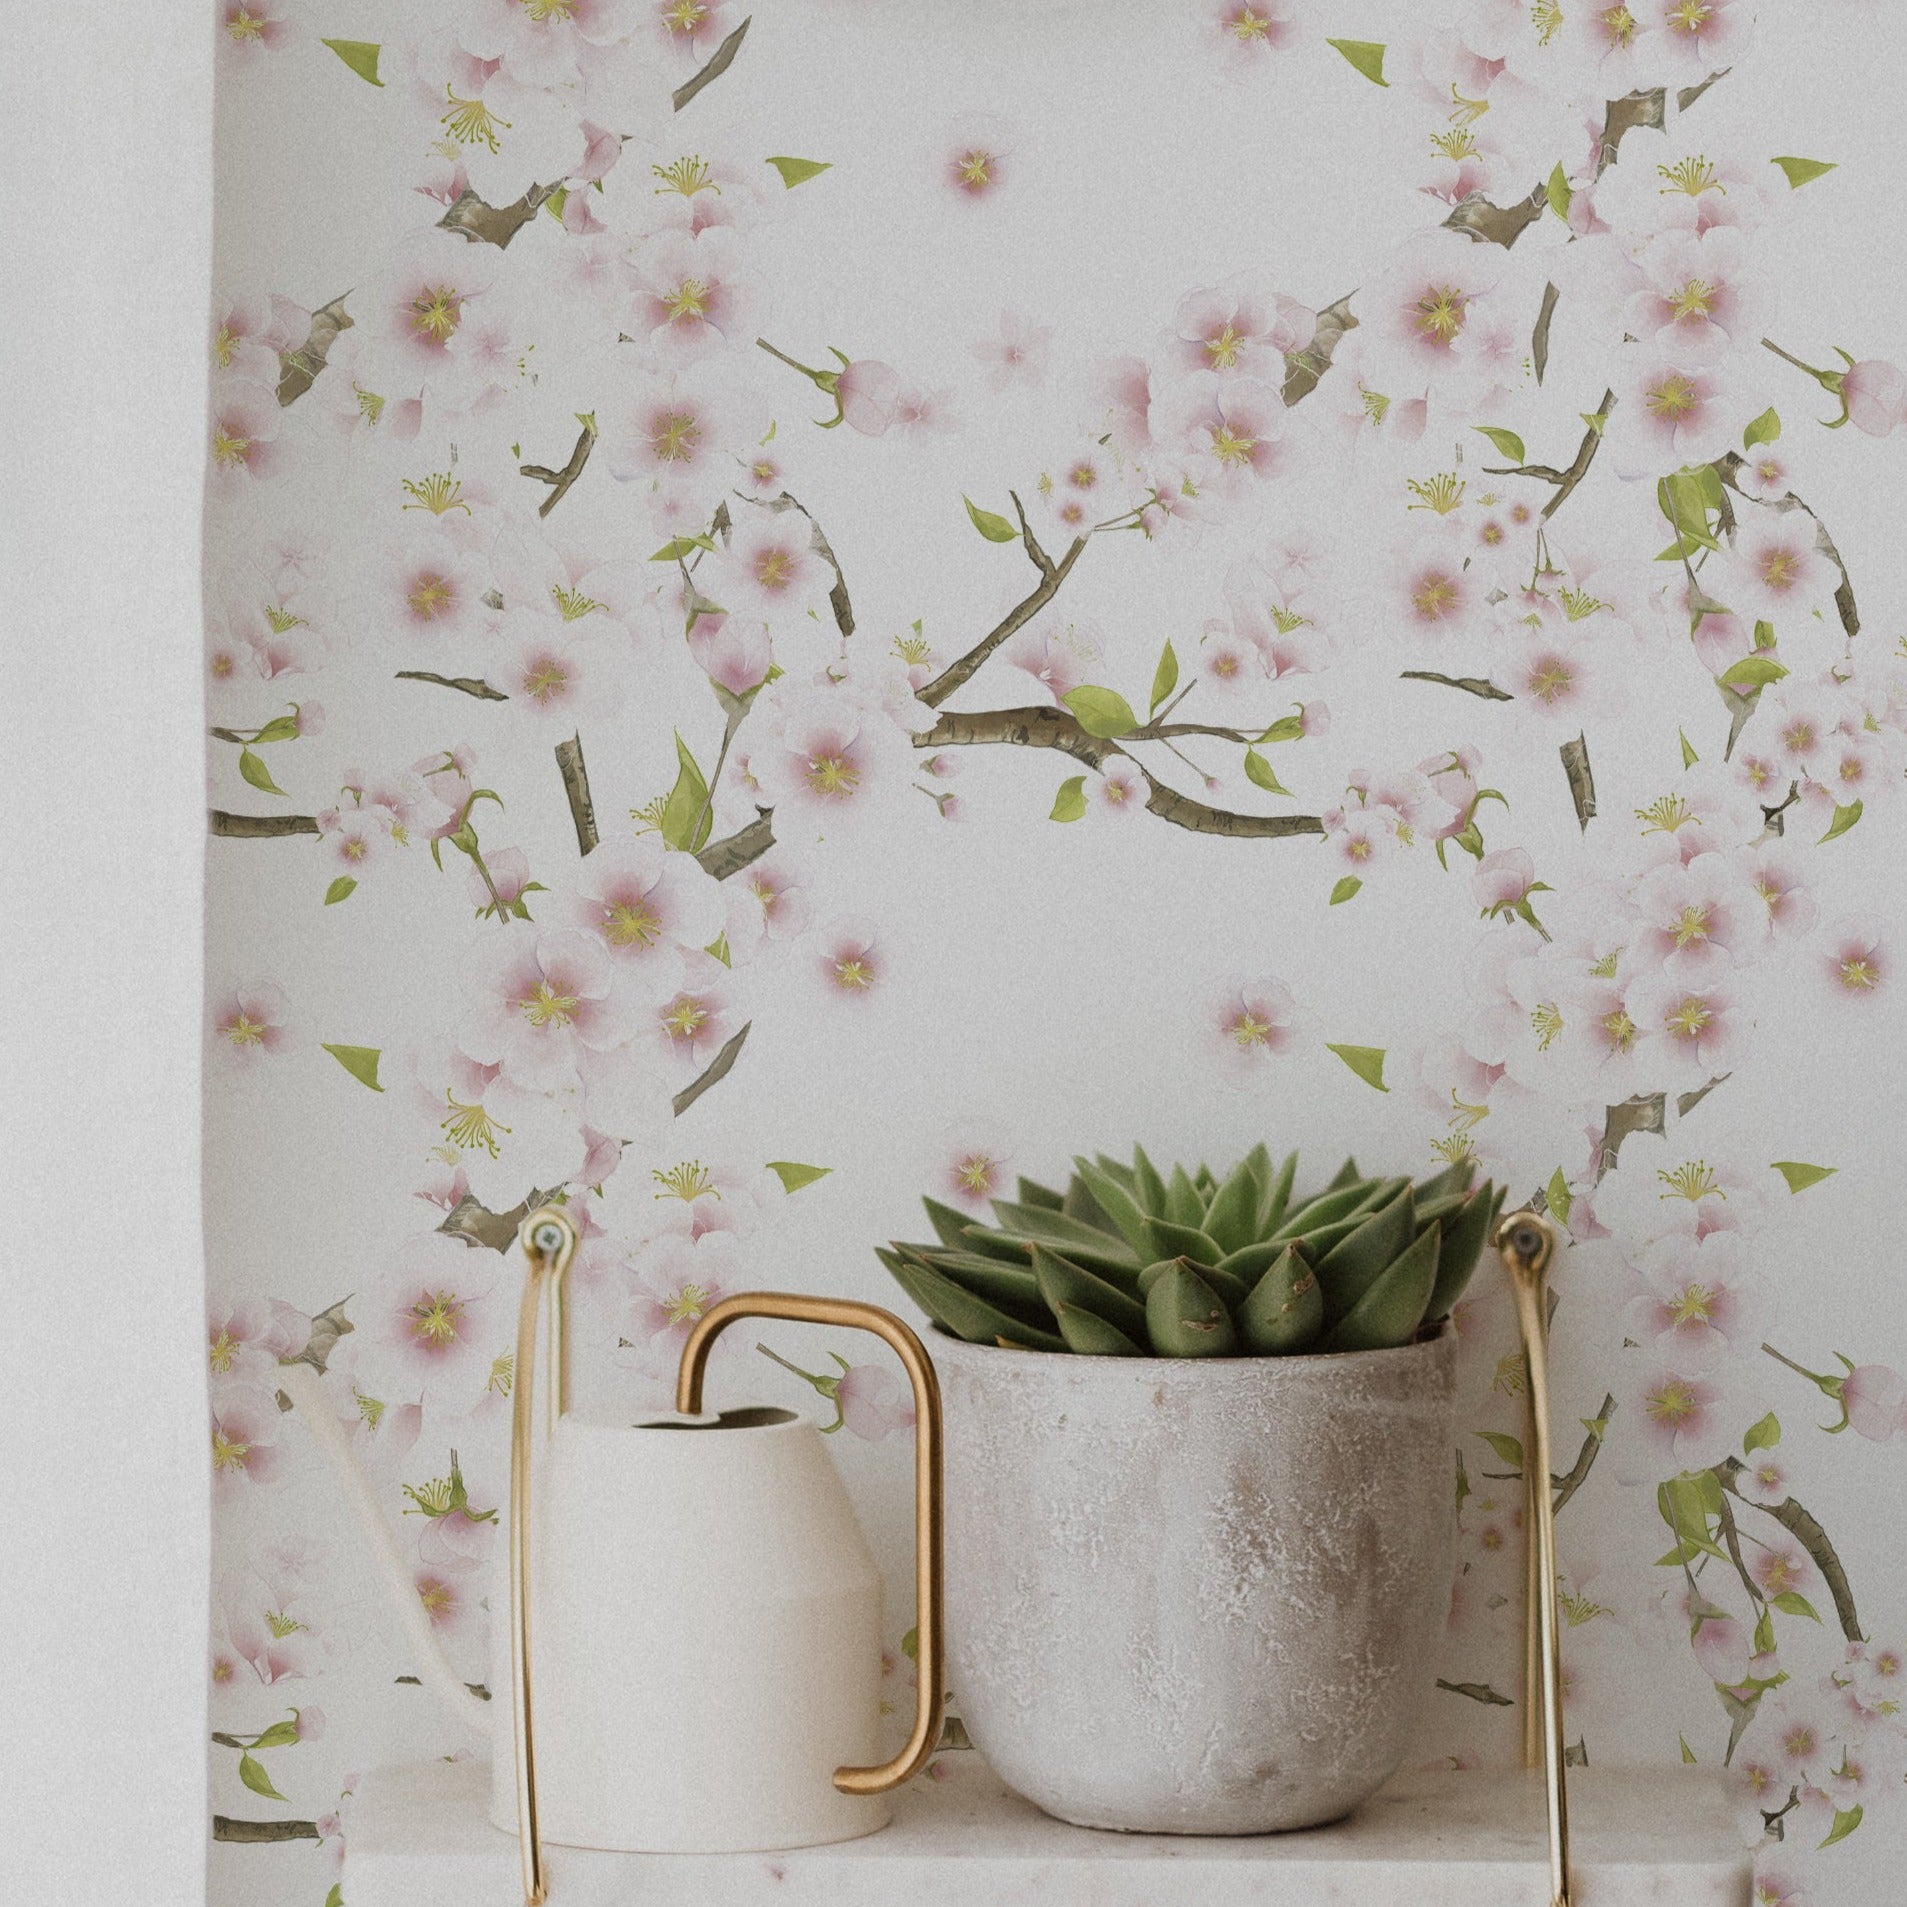 Room setting showcasing Sakura Wallpaper with pink cherry blossoms and green leaves, complemented by a white shelf with a potted plant and decorative items